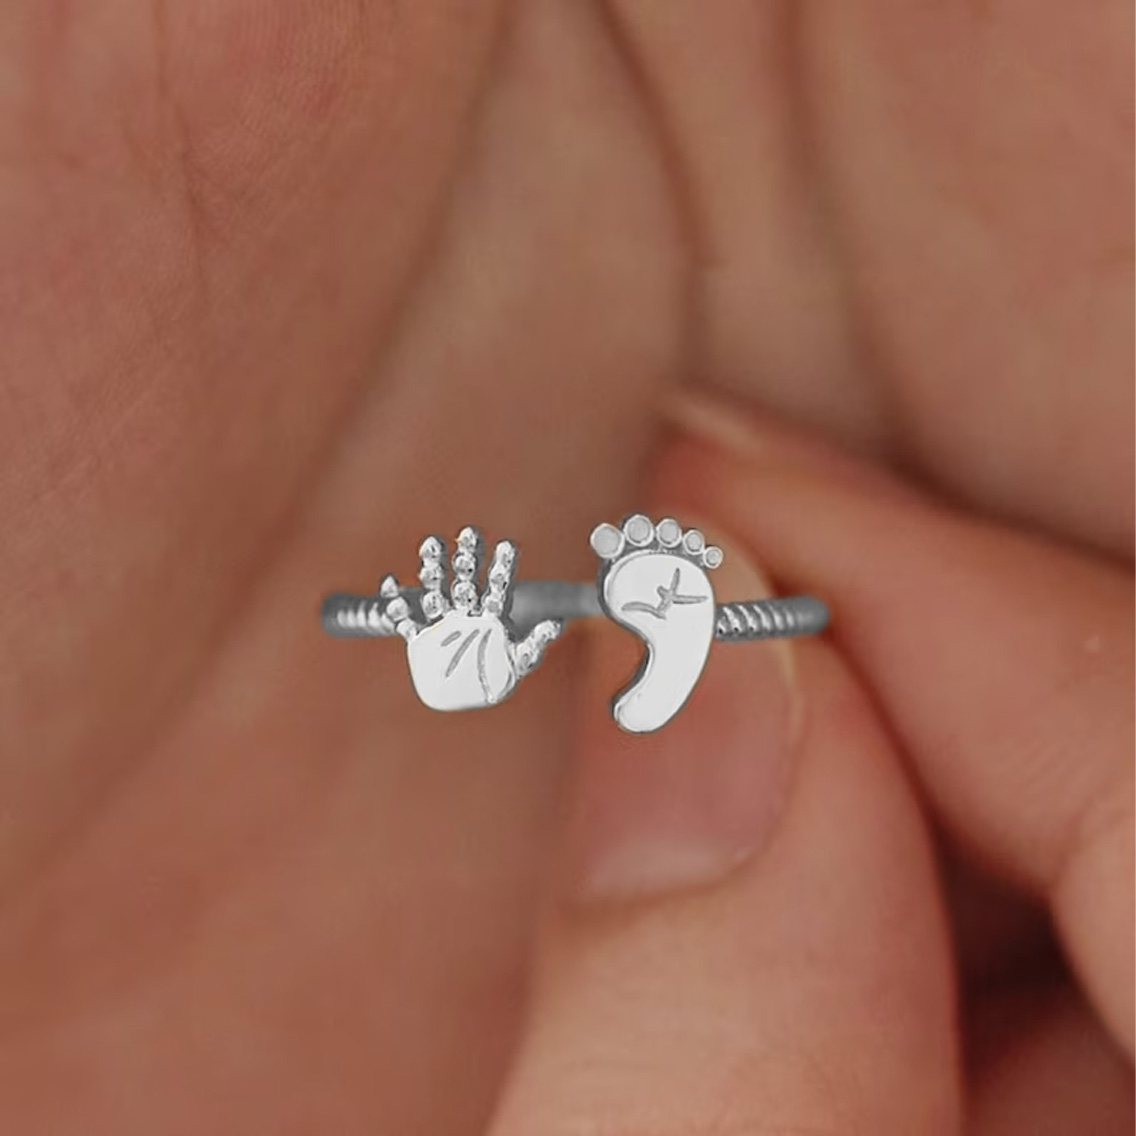 For Mama To Be - You Are Going To Make A Wonderful Mama Baby Palm And Feet Ring